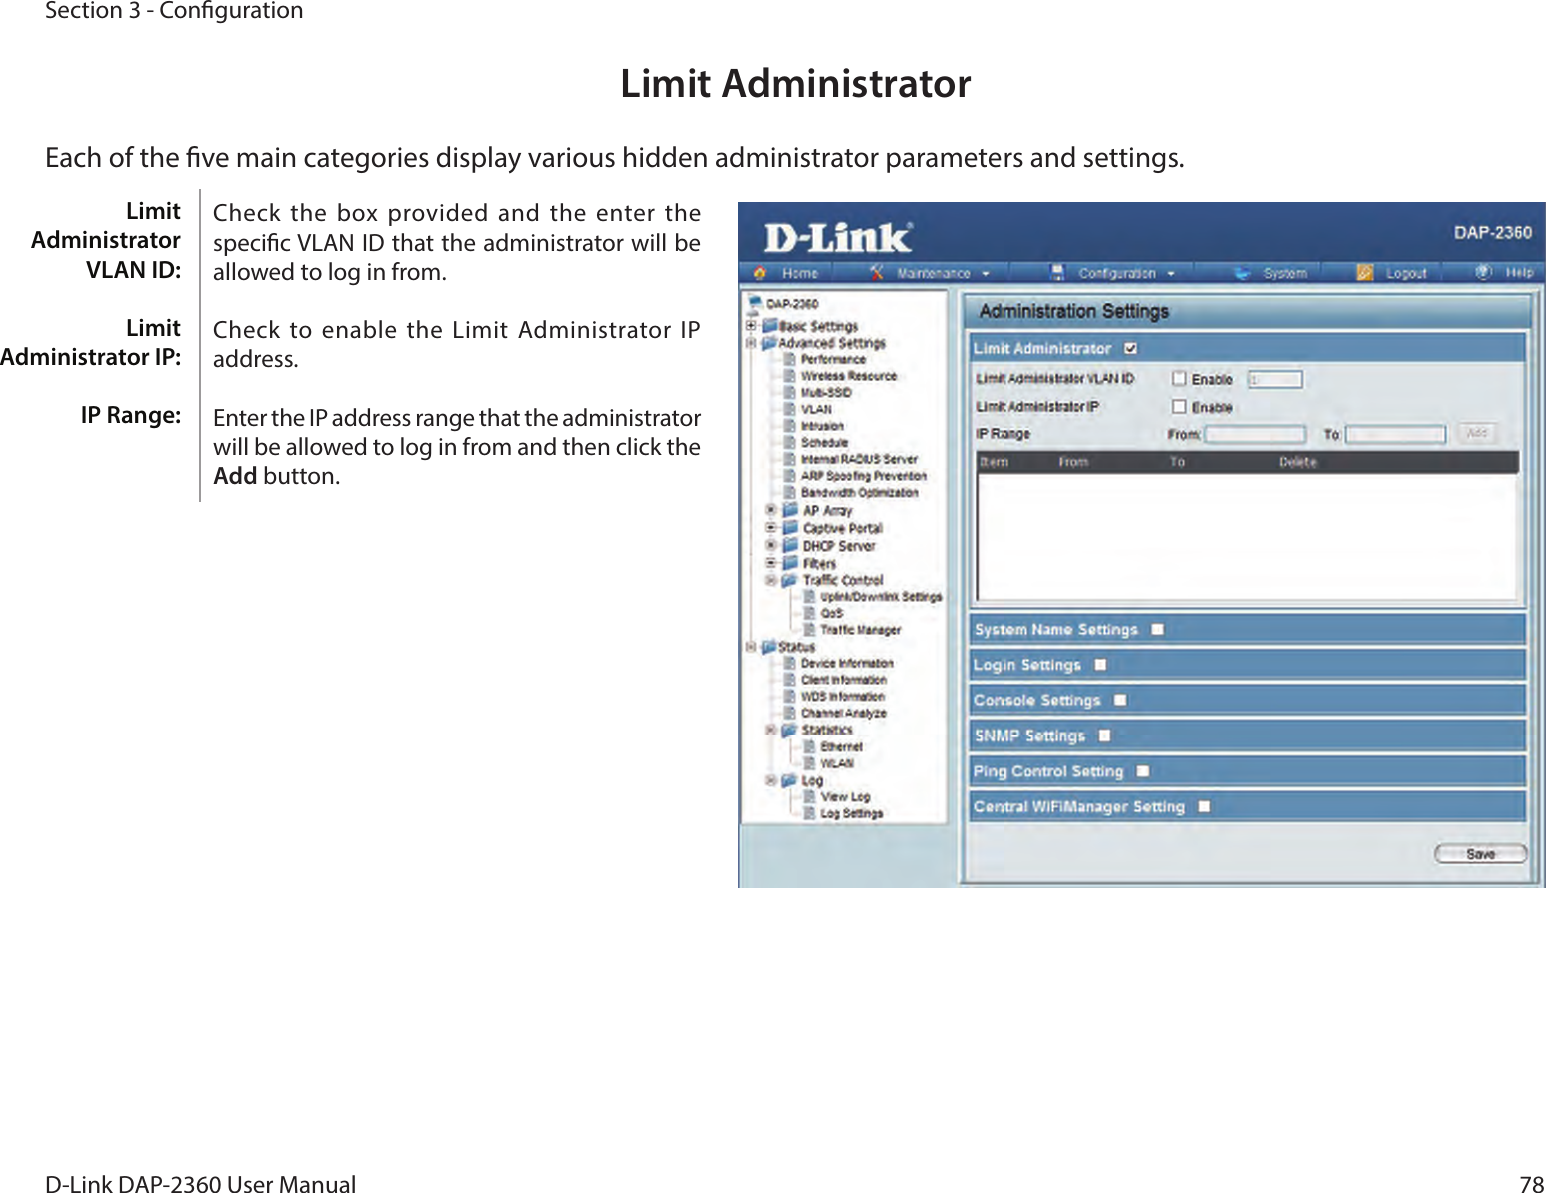 78D-Link DAP-2360 User ManualSection 3 - CongurationLimit AdministratorEach of the ve main categories display various hidden administrator parameters and settings.Check the  box provided and  the enter the specic VLAN ID that the administrator will be allowed to log in from.Check to enable the Limit  Administrator  IP address.Enter the IP address range that the administrator will be allowed to log in from and then click the Add button.Limit Administrator VLAN ID:Limit Administrator IP:IP Range: